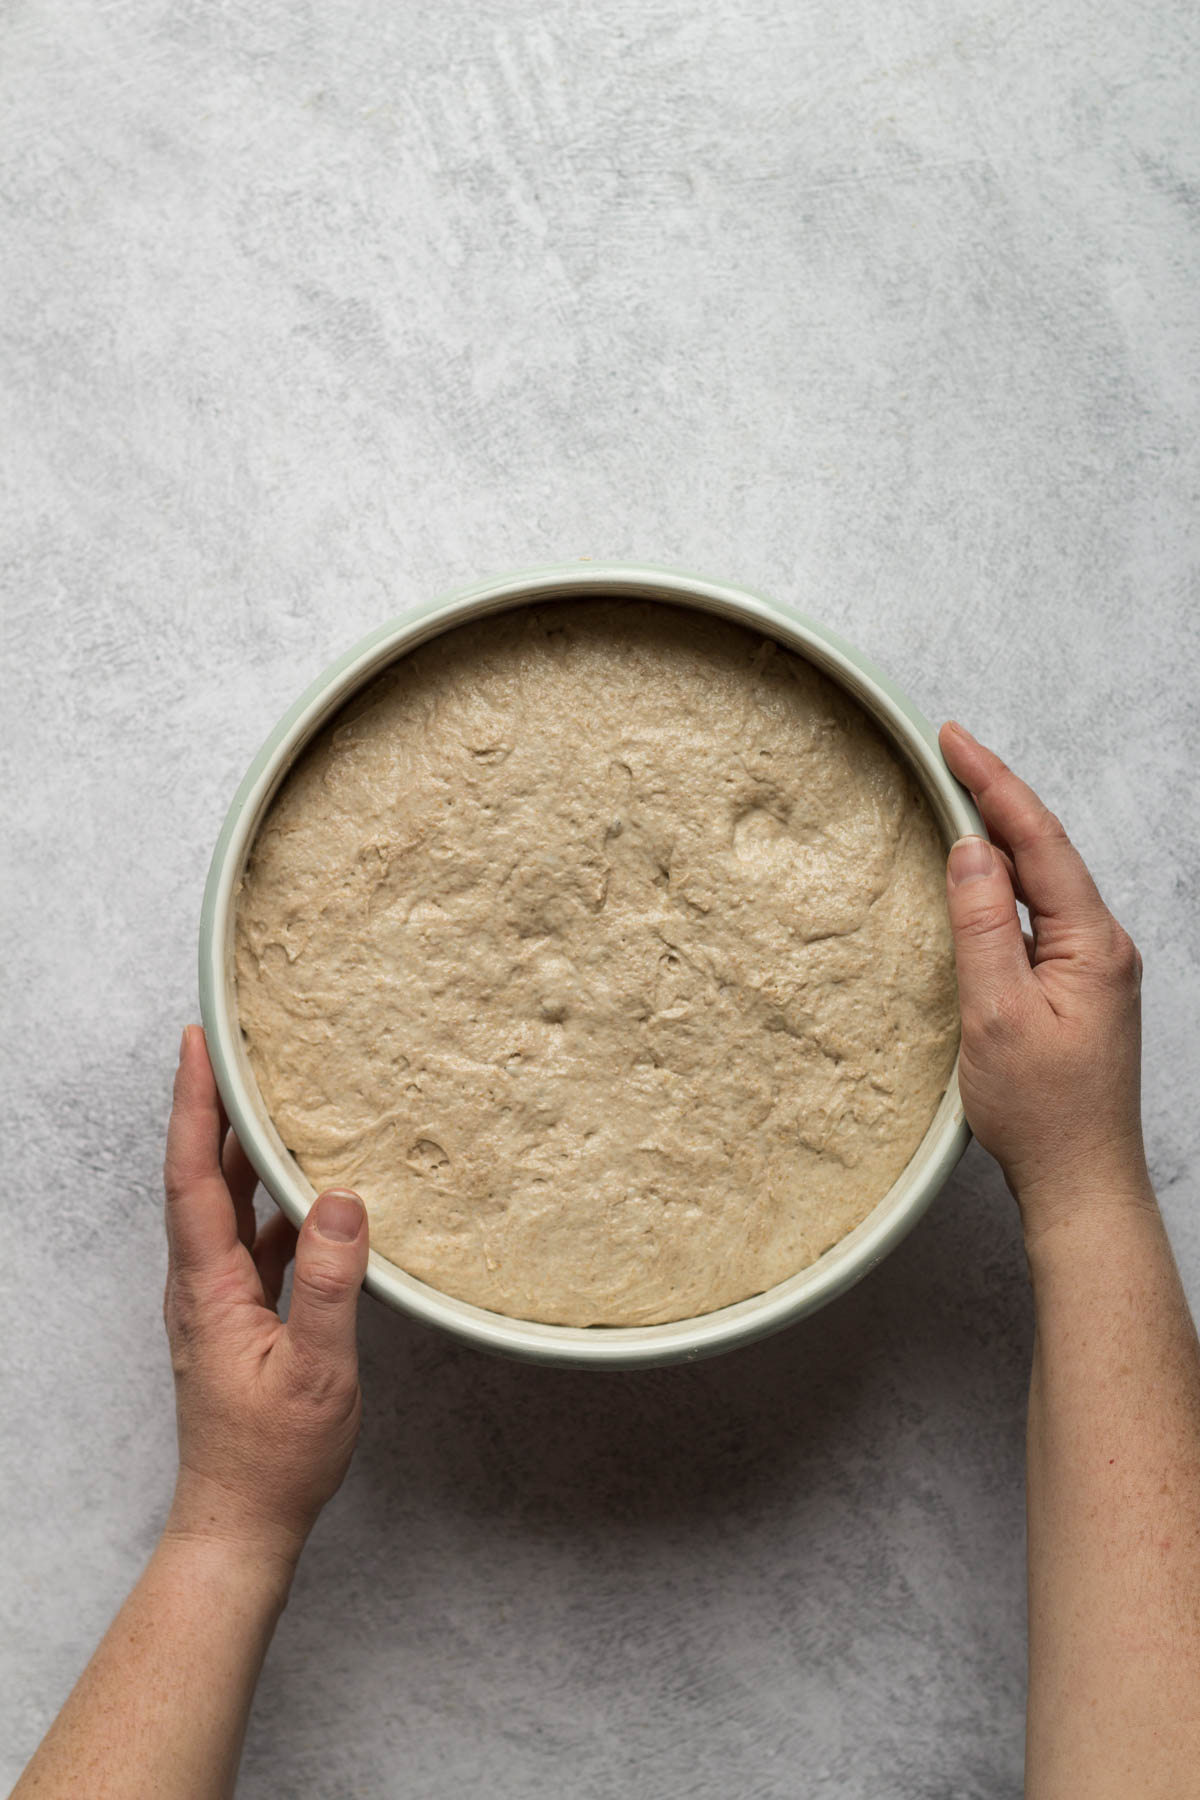 Bread dough in a bowl doubled in size